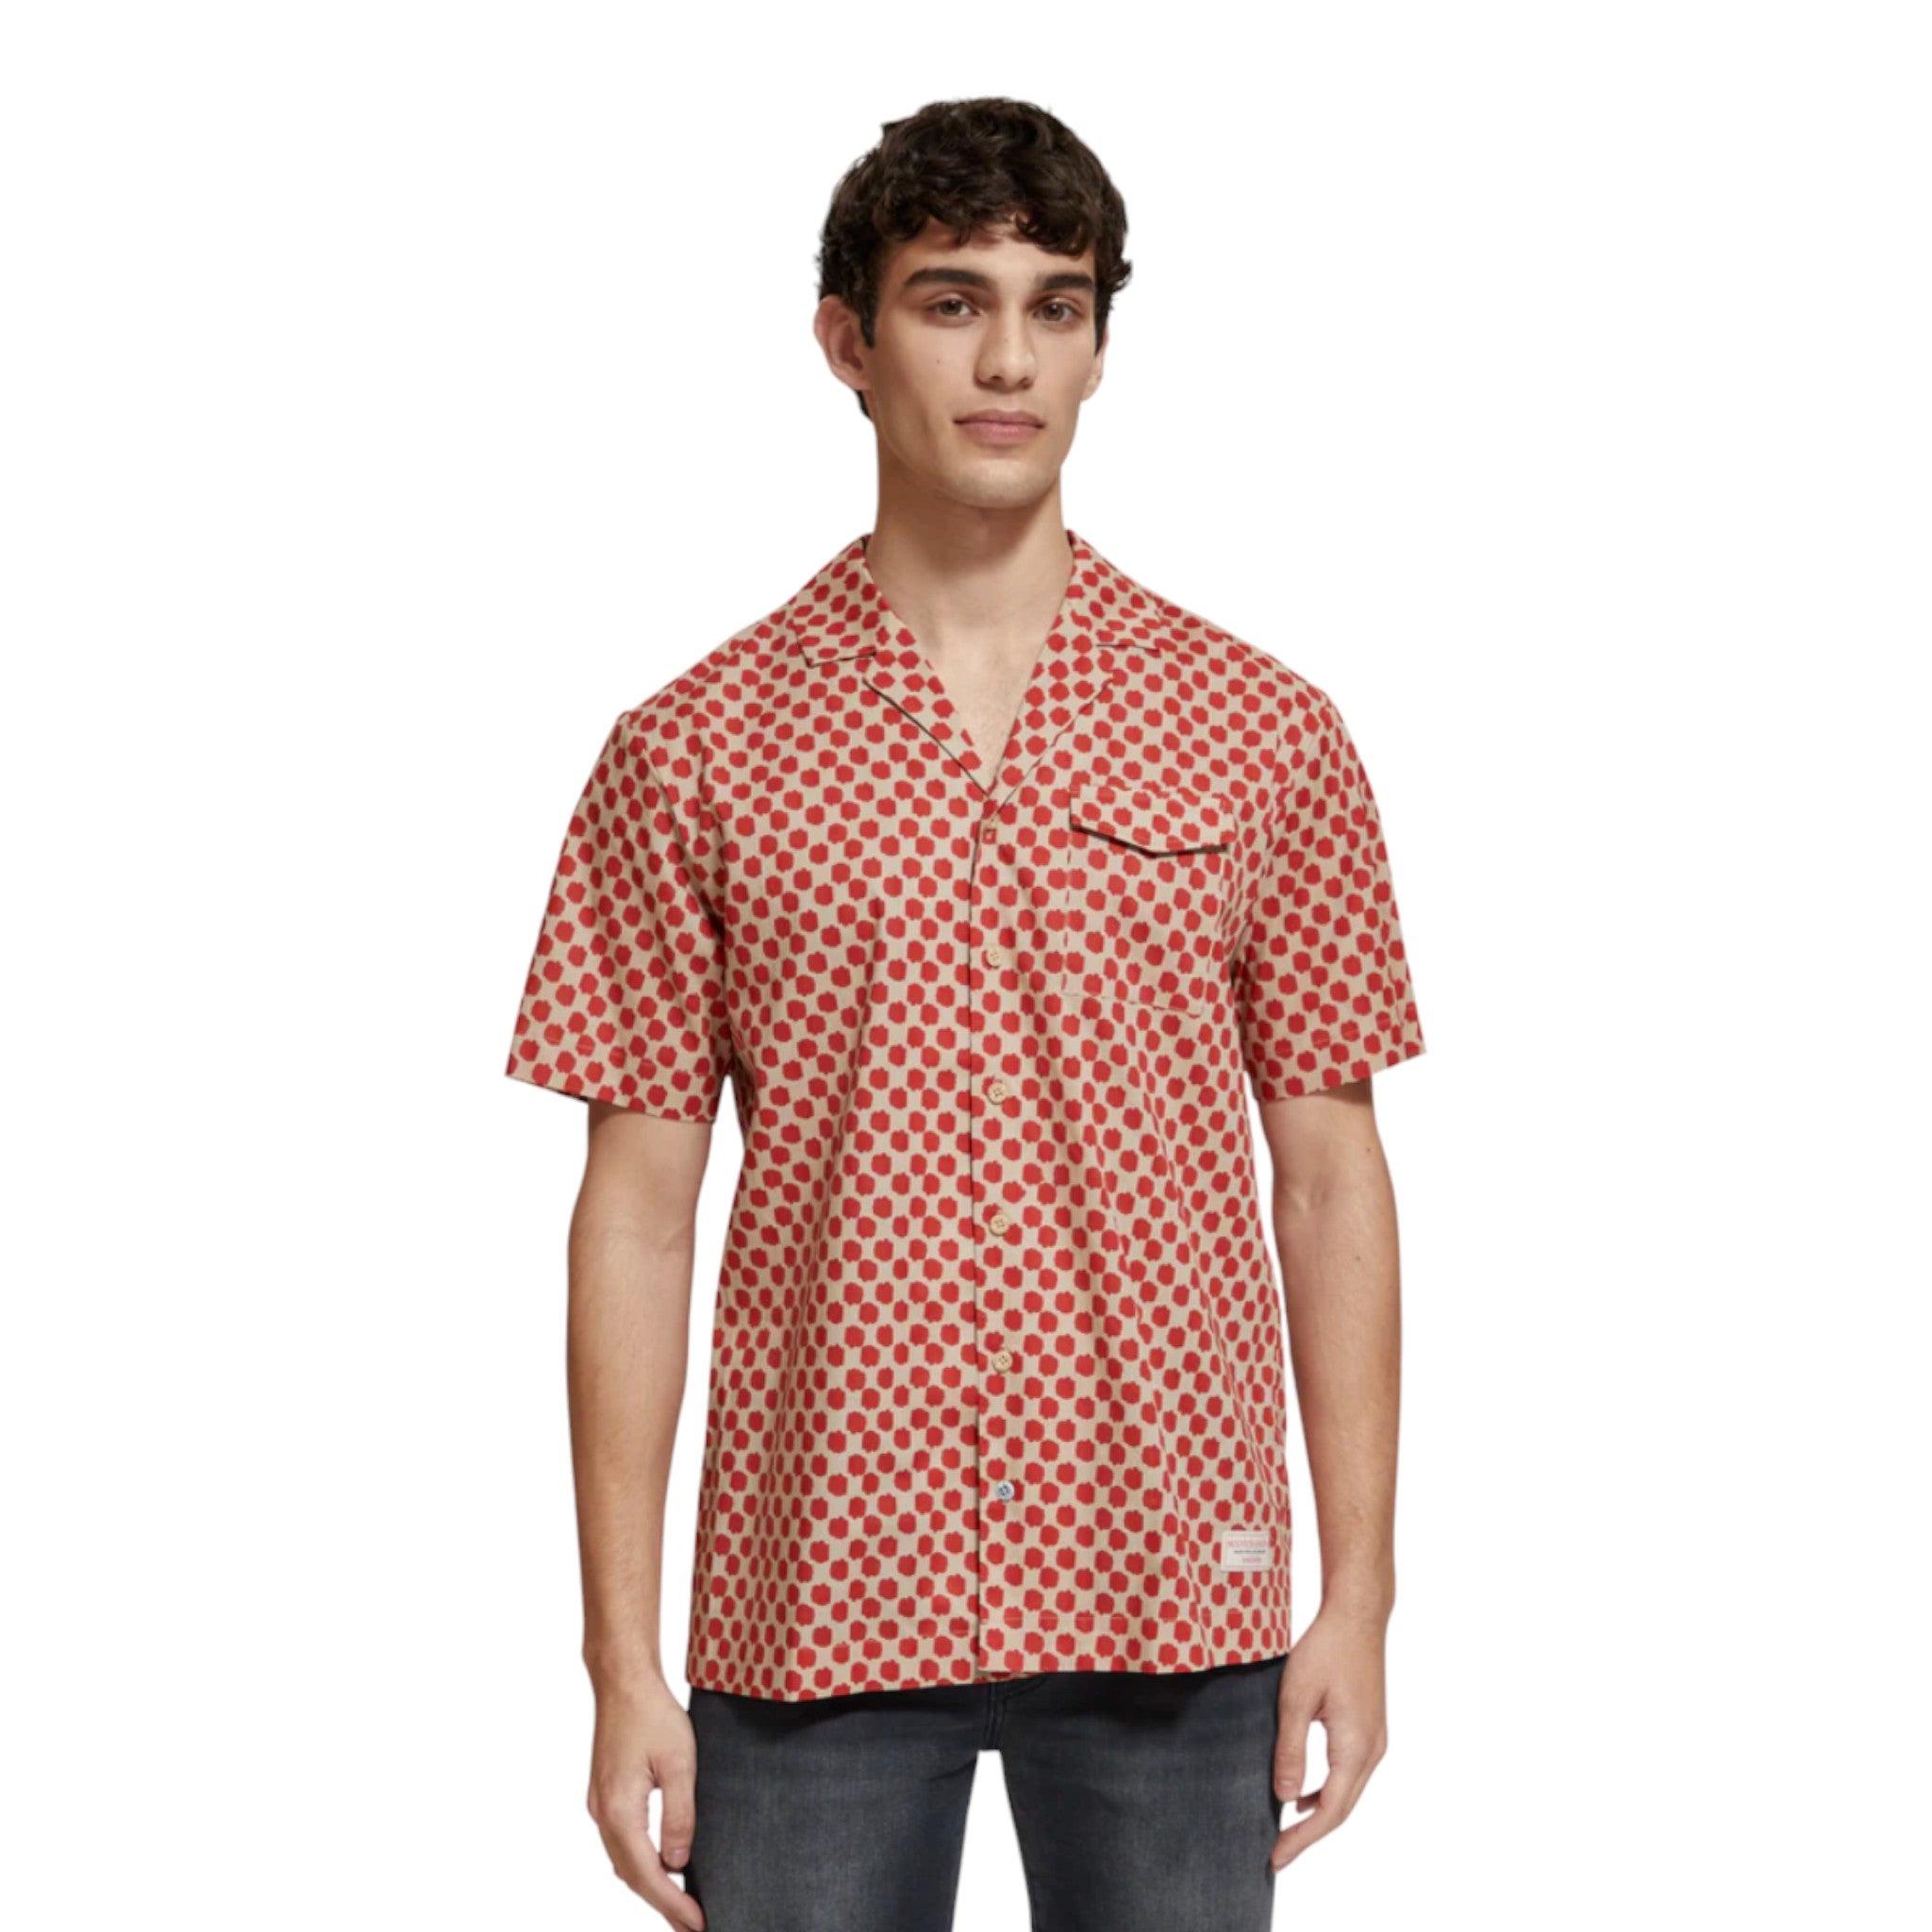 Scotch & Soda - Printed Short Sleeve Button Up - Polka Red Boat